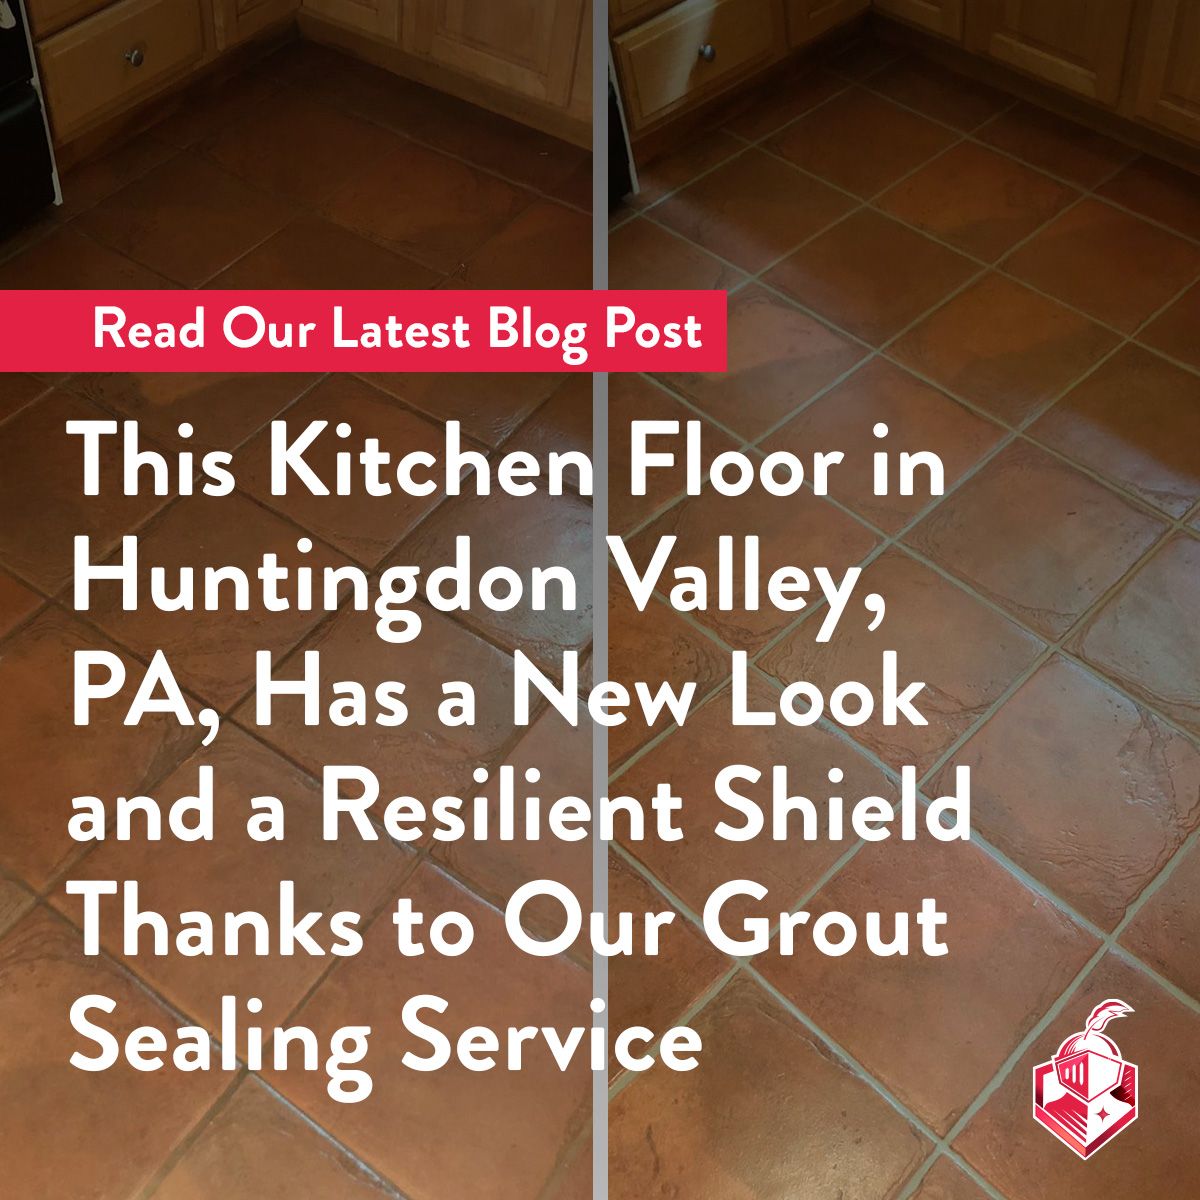 This Kitchen Floor in Huntingdon Valley, PA, Has a New Look and a Resilient Shield Thanks to Our Grout Sealing Service